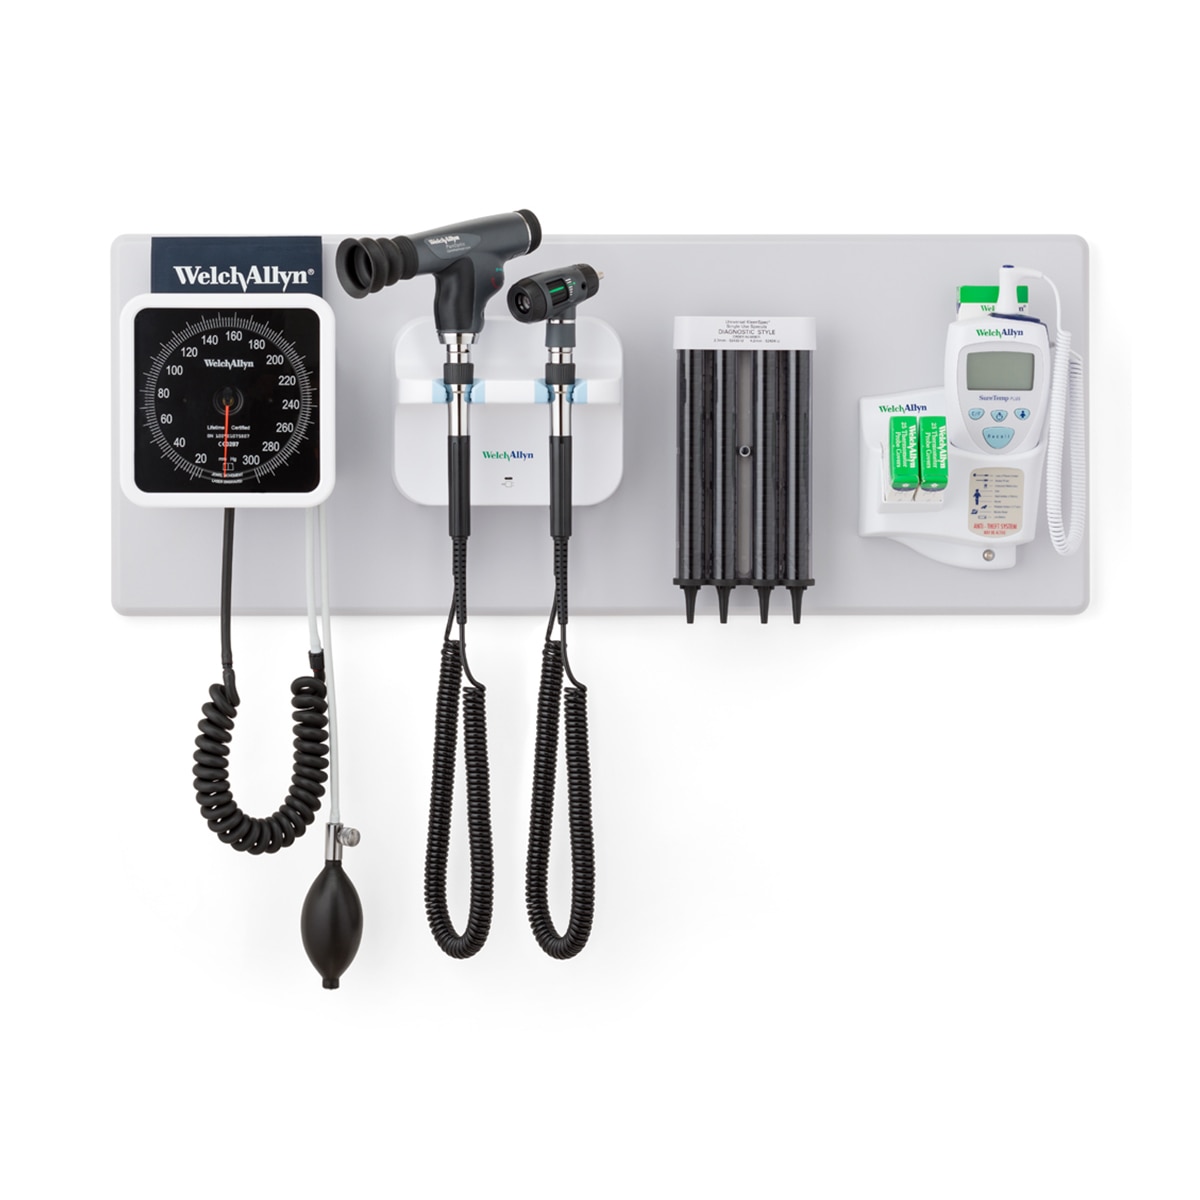 777 Integrated Wall System with otoscope, PanOptic ophthalmoscope, probe covers and Connex Spot Monitor vital signs device